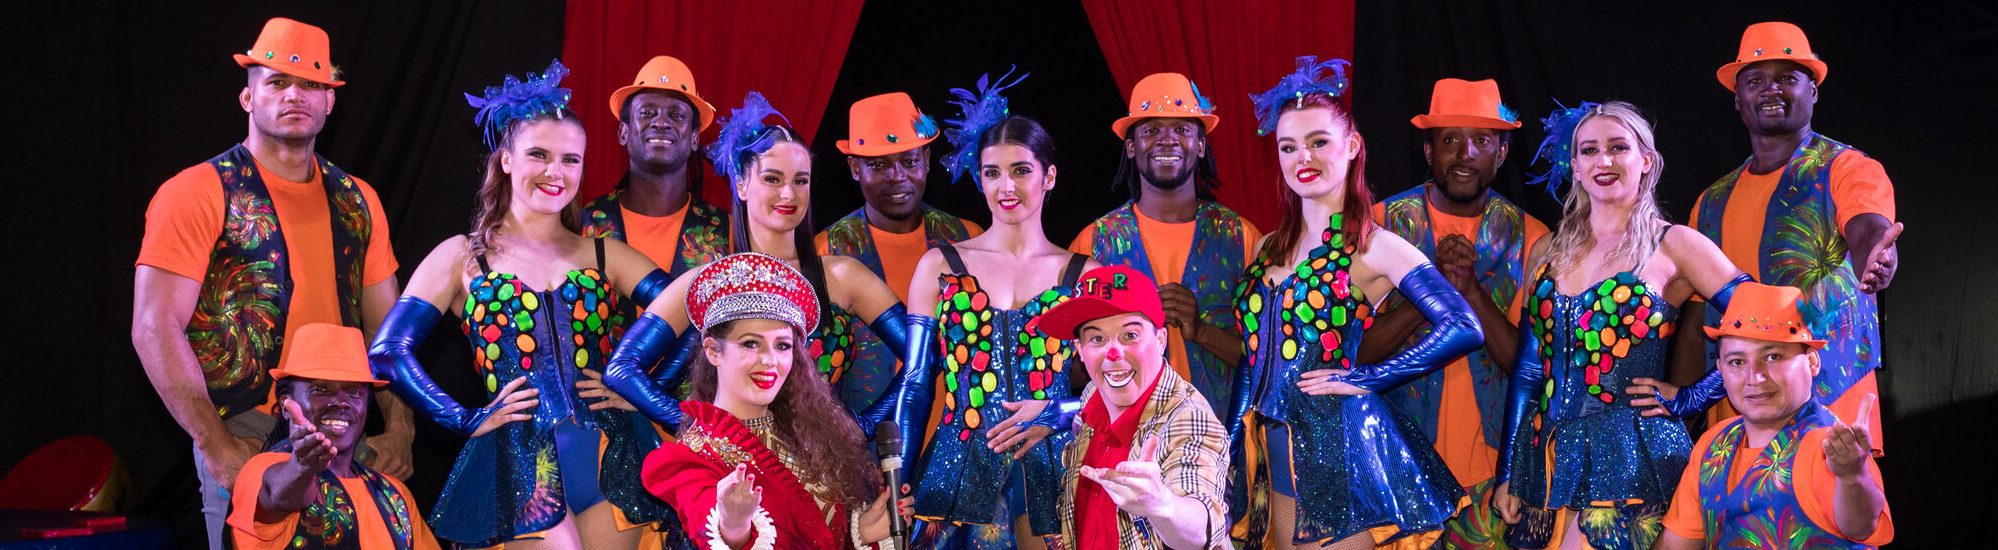 A circus troupe pose in front of the circus ring curtains. There are both men and women wearing bright and colourful clothing.